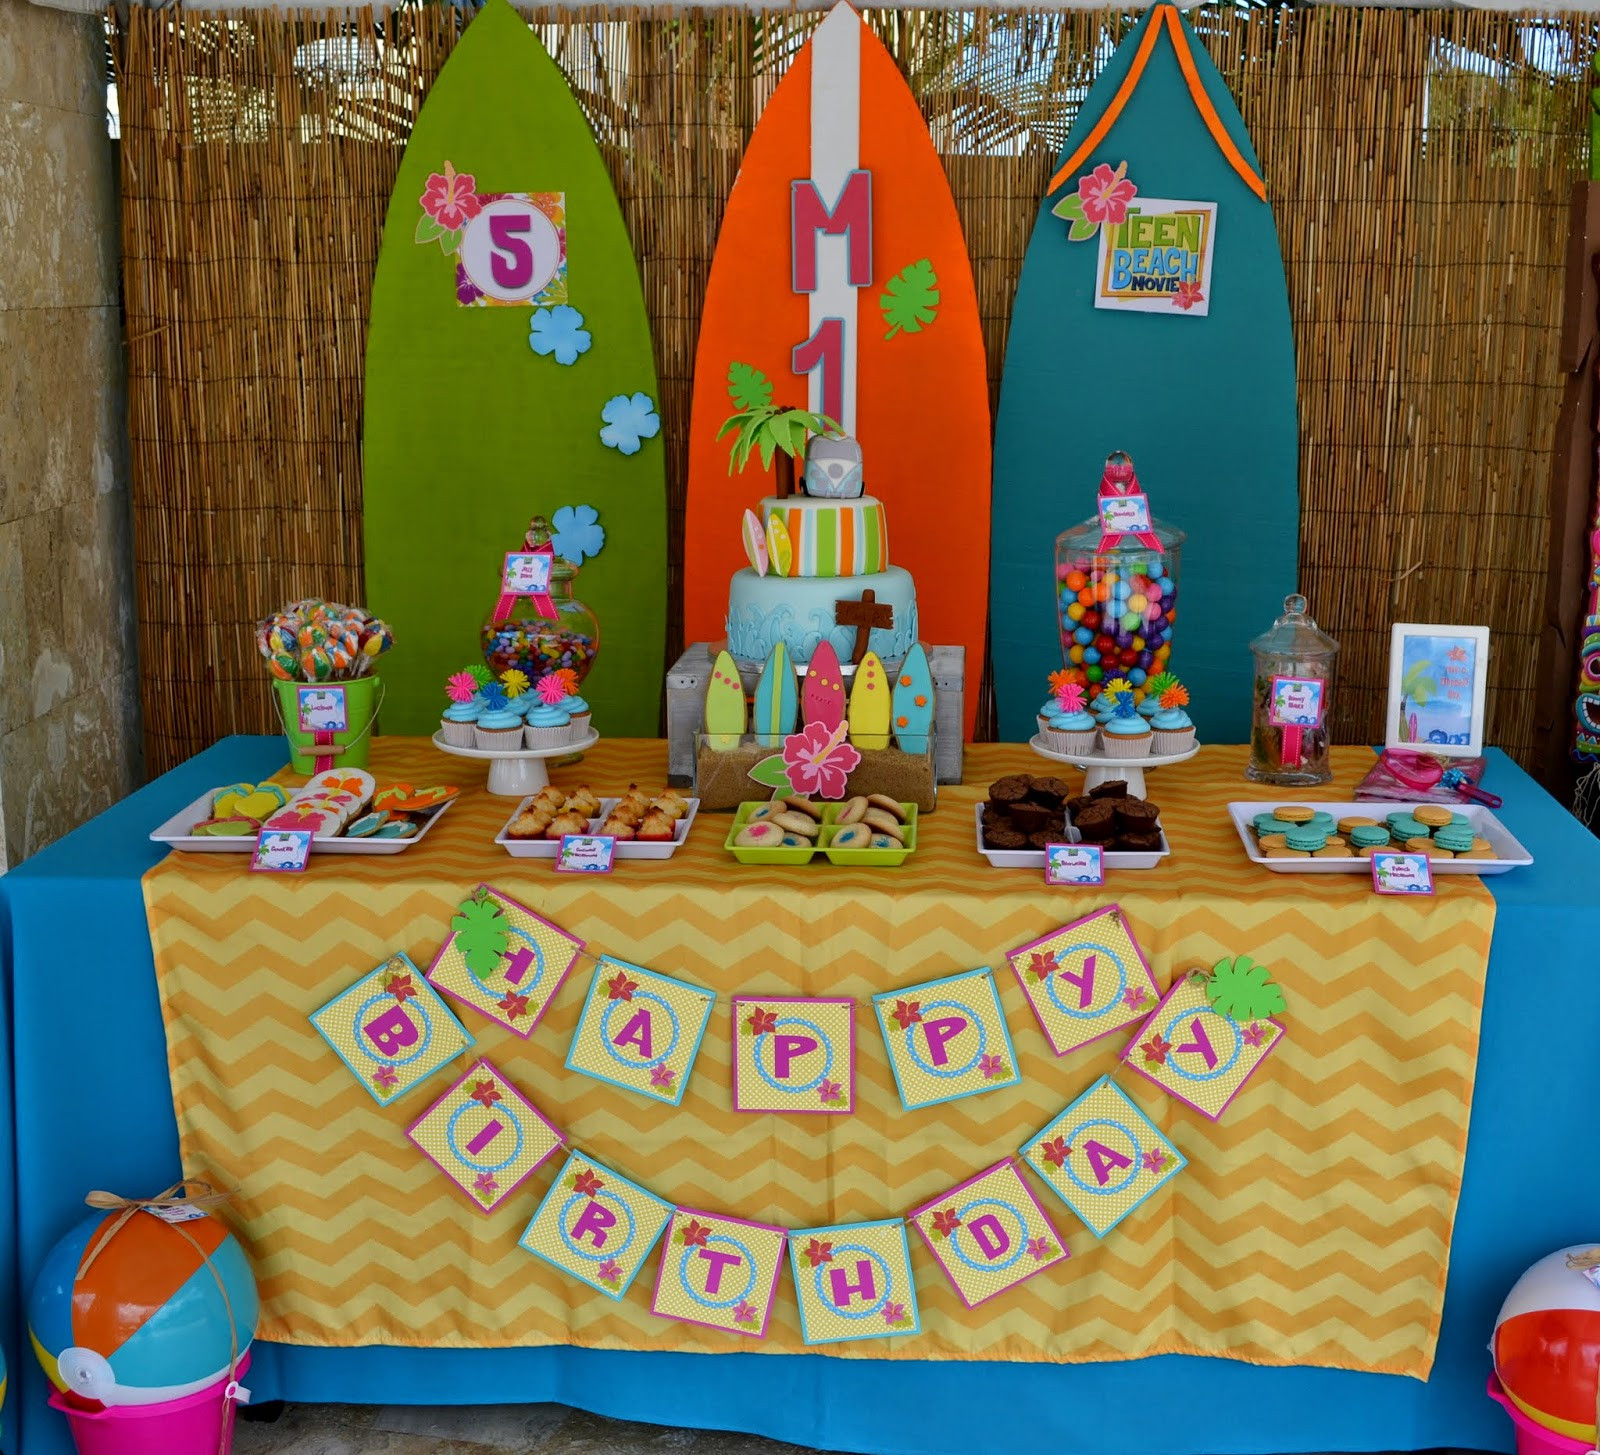 Teen Pool Party Ideas
 Partylicious Events PR Teen Beach Movie Pool Party